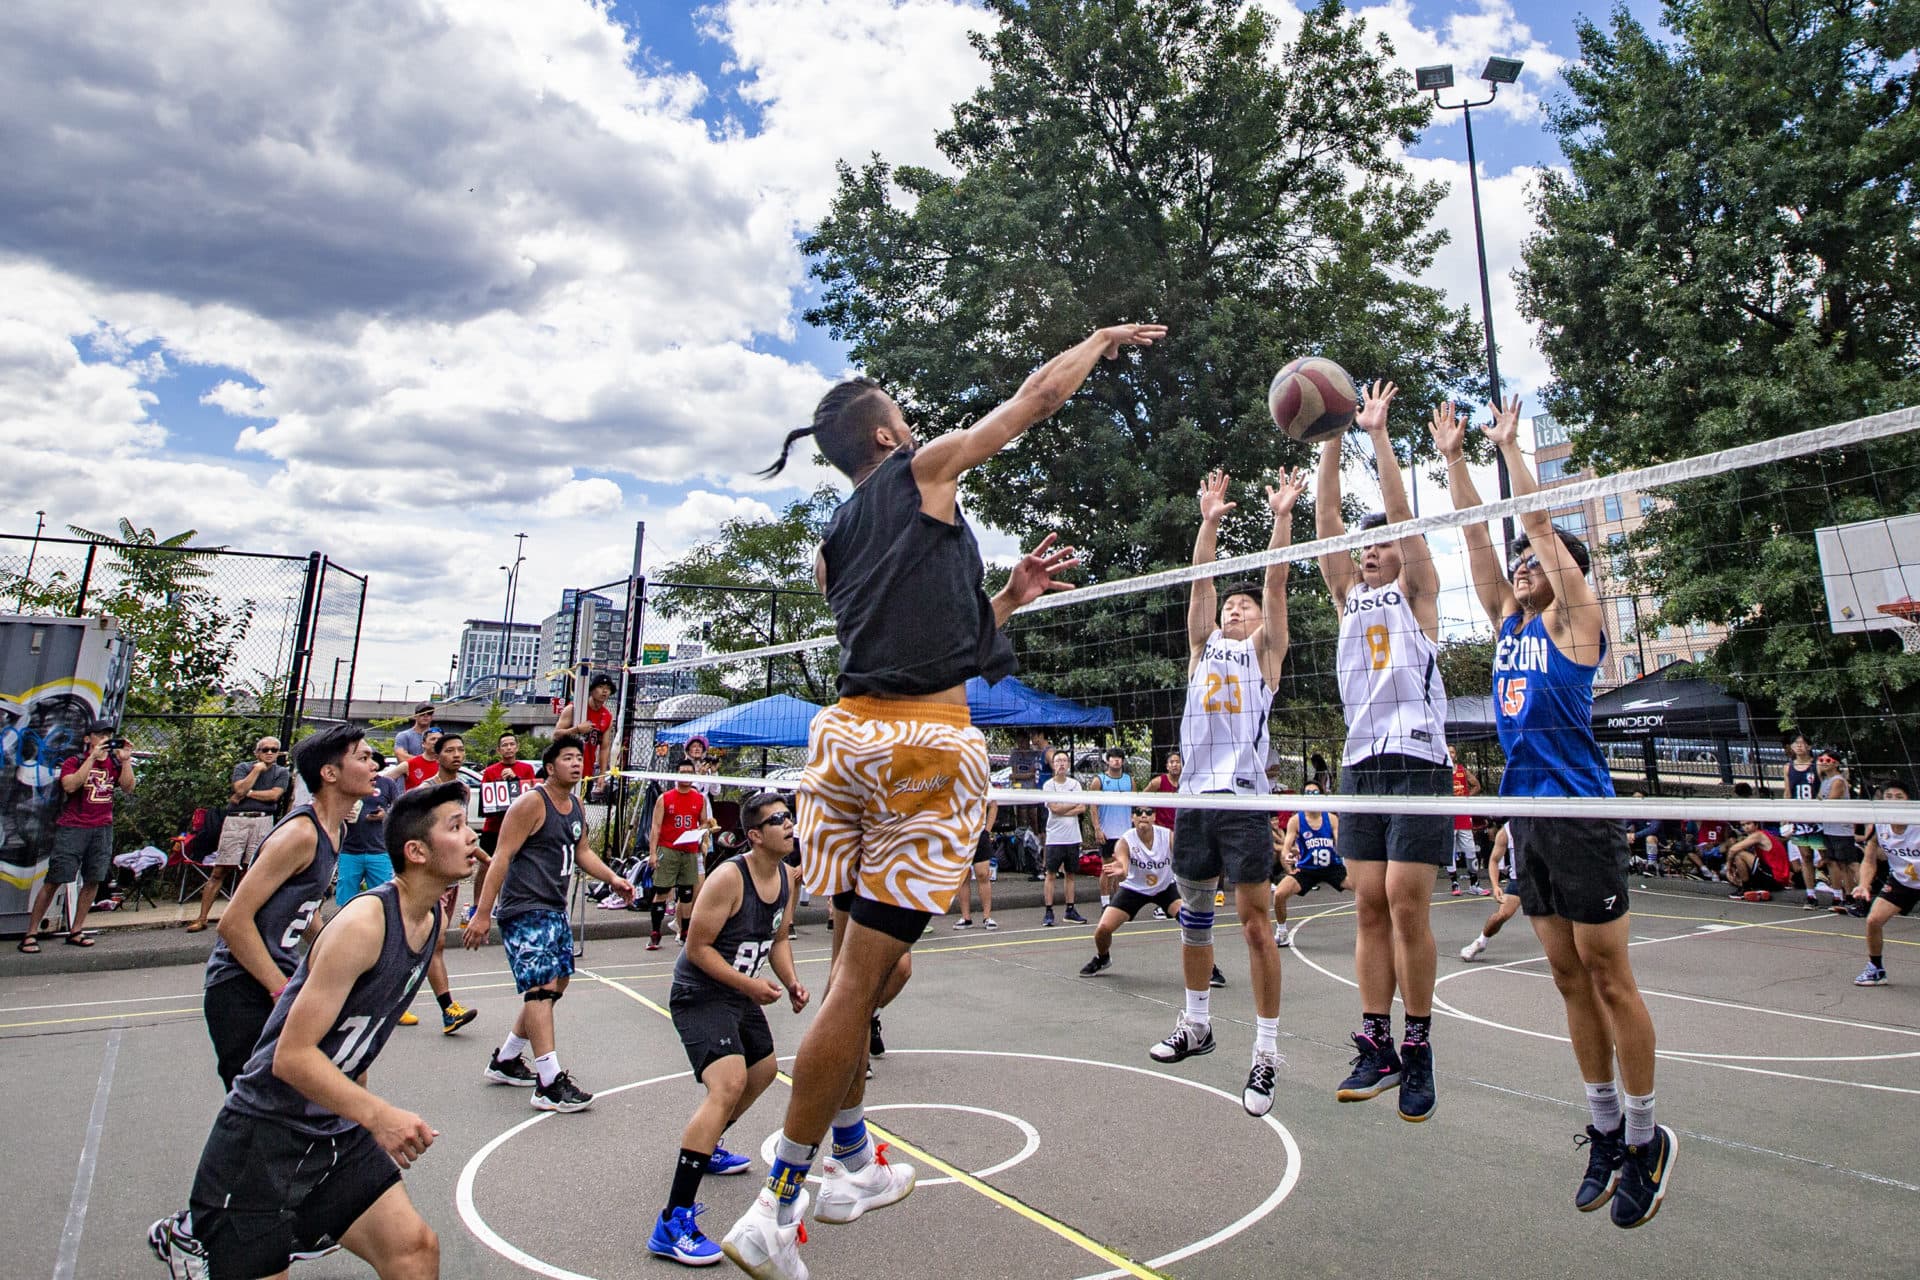 Boston Hurricanes defenders attempt to stop a spike in a match against the Boston Rising Tide at Reggie Wong Memorial Park in Chinatown.  (Jesse Costa/WBUR)